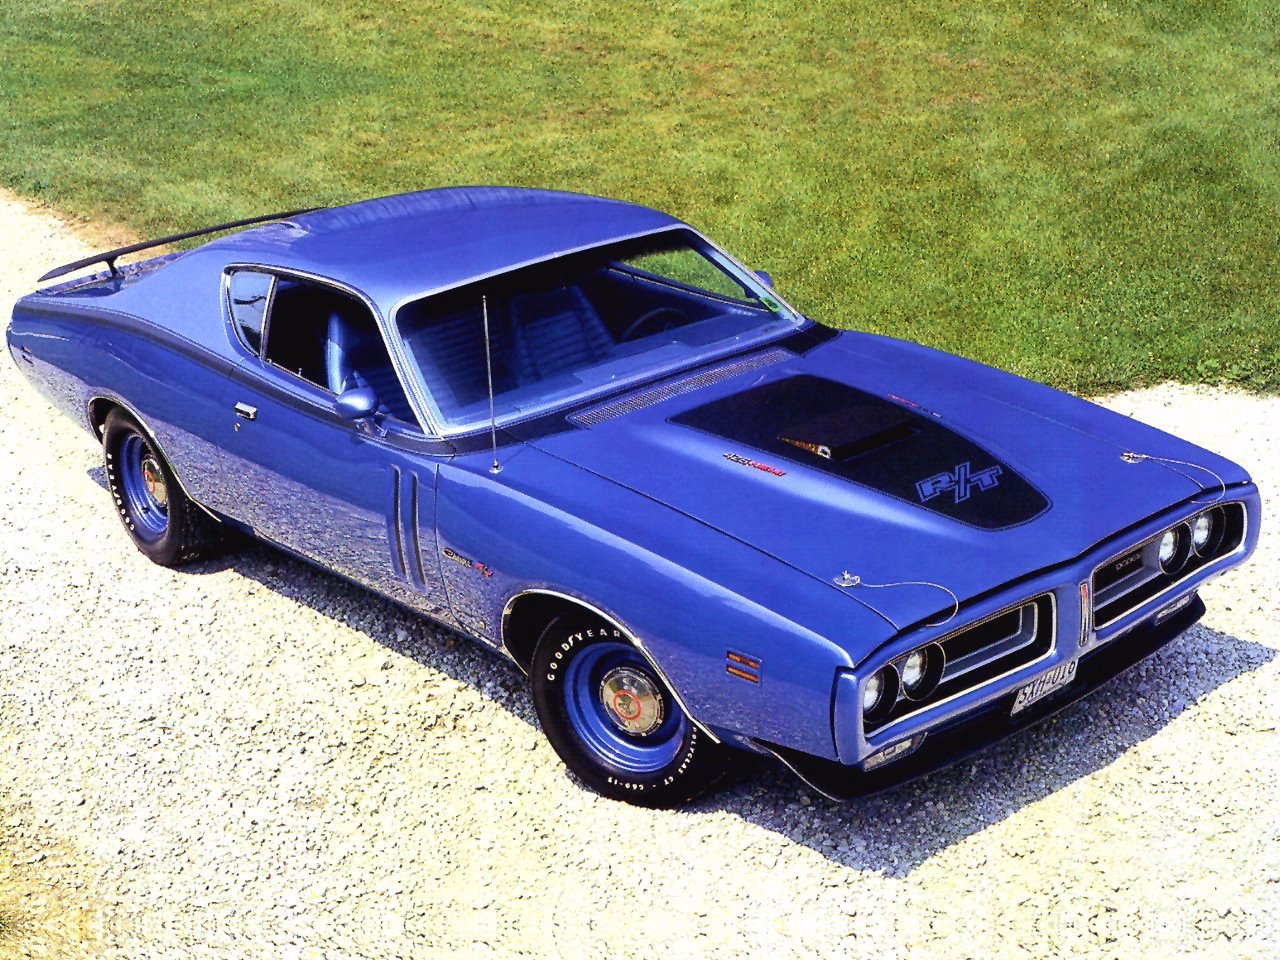 vintage photos of 1968 to 1971 dodge chargers